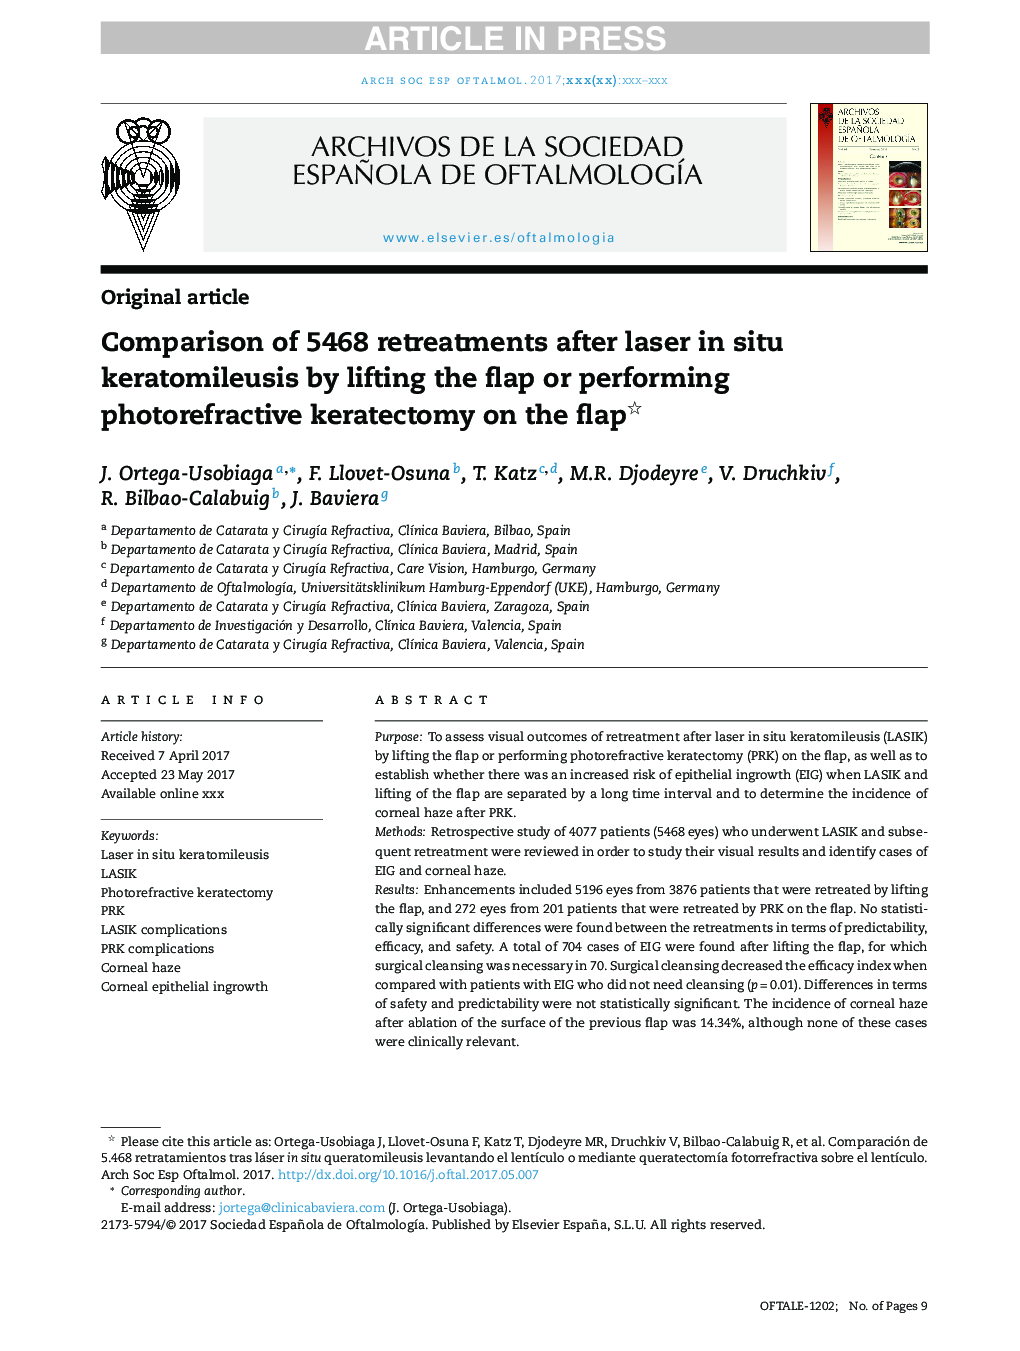 Comparison of 5468 retreatments after laser in situ keratomileusis by lifting the flap or performing photorefractive keratectomy on the flap